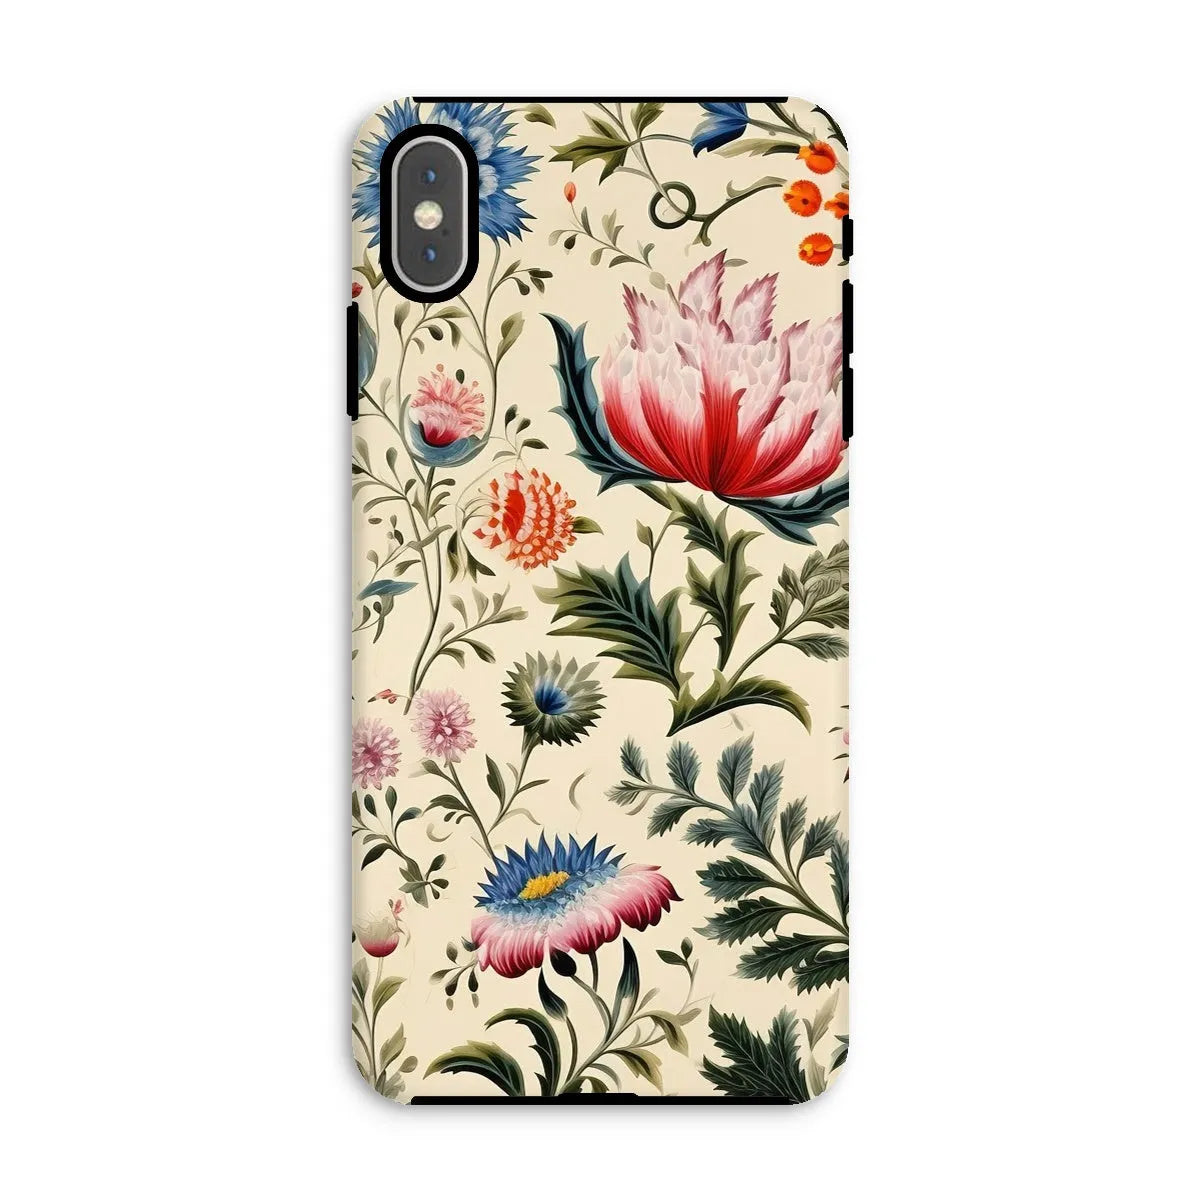 Wildflower Hoopla - Floral Garden Aesthetic Phone Case - Iphone Xs Max / Matte - Mobile Phone Cases - Aesthetic Art